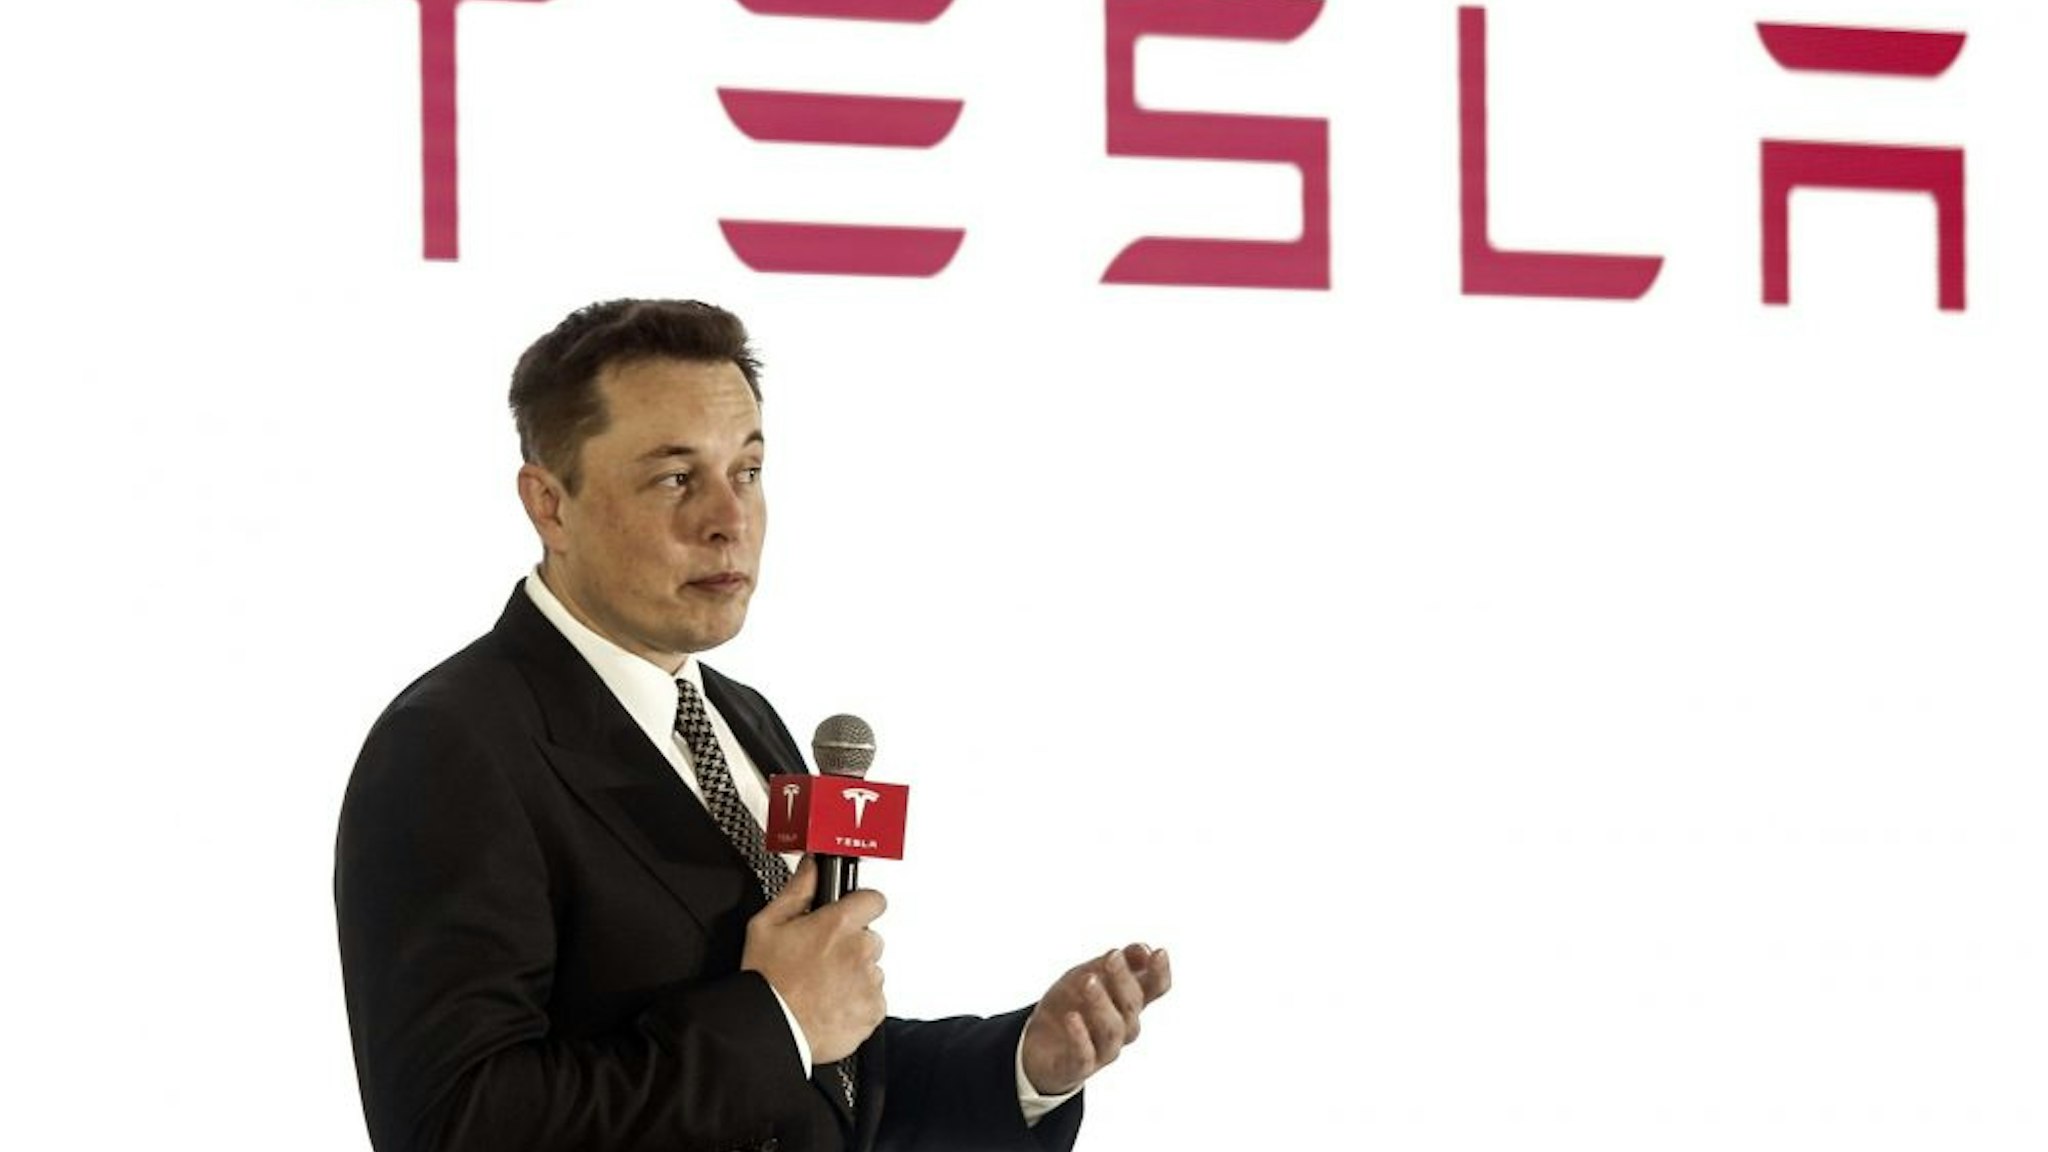 BEIJING, CHINA - OCTOBER 23: (CHINA OUT) Elon Musk, Chairman, CEO and Product Architect of Tesla Motors, addresses a press conference to declare that the Tesla Motors releases v7.0 System in China on a limited basis for its Model S, which will enable self-driving features such as Autosteer for a select group of beta testers on October 23, 2015 in Beijing, China. The v7.0 system includes Autosteer, a new Autopilot feature. While it's not absolutely self-driving and the driver still need to hold the steering wheel and be mindful of road conditions and surrounding traffic when using Autosteer. When set to the new Autosteer mode, graphics on the driver's display will show the path the Model S is following, post the current speed limit and indicate if a car is in front of the Tesla.